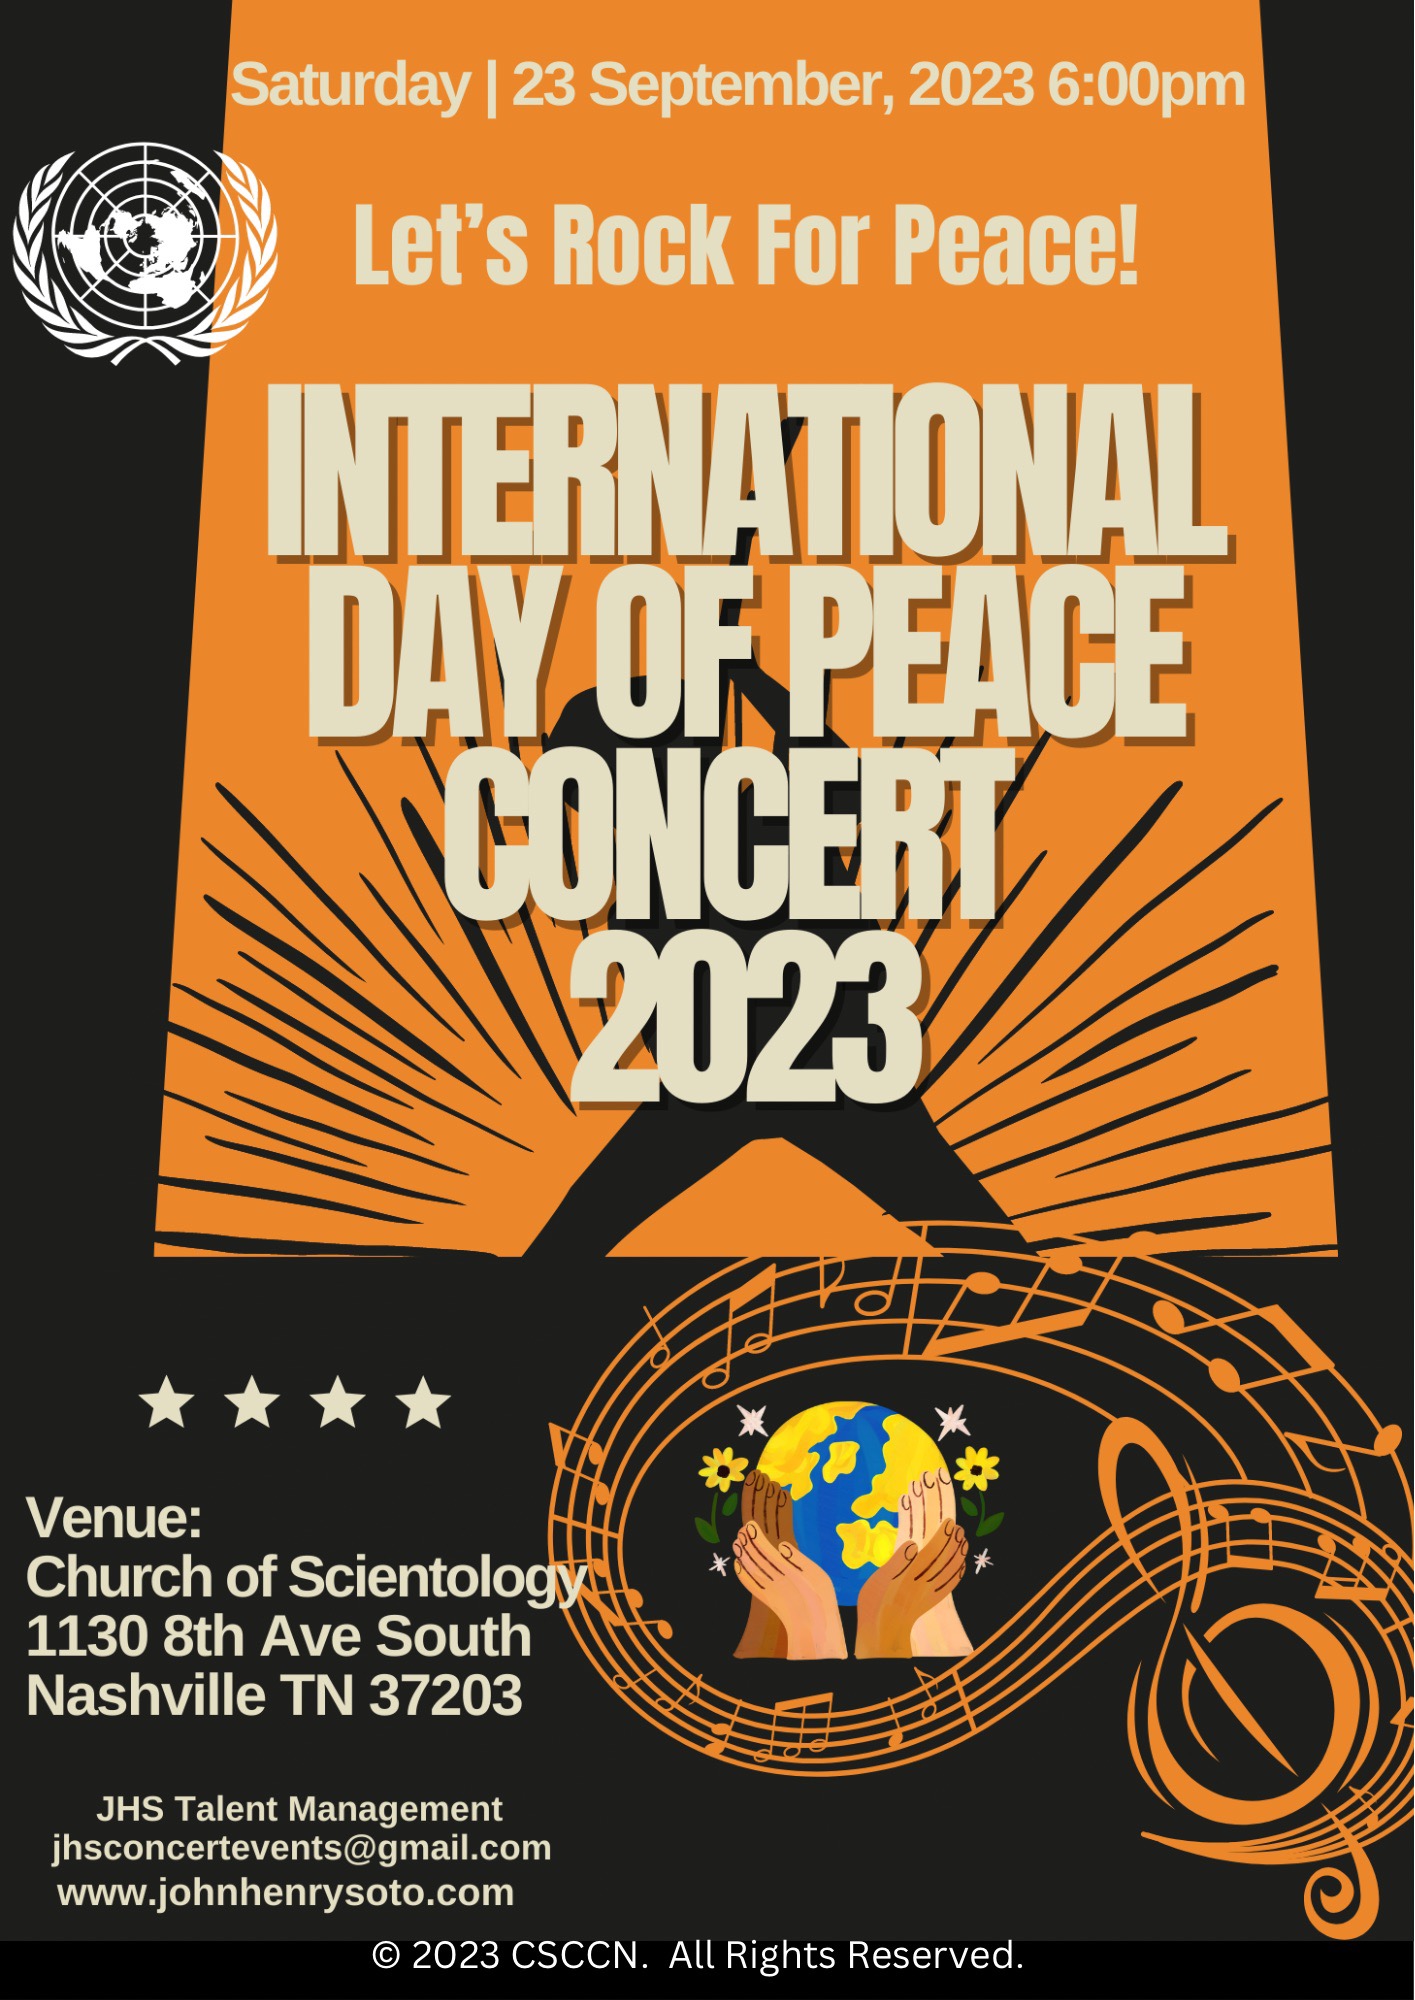 Church of Scientology Peace Day Concert Brings Light to Freedom of Expression